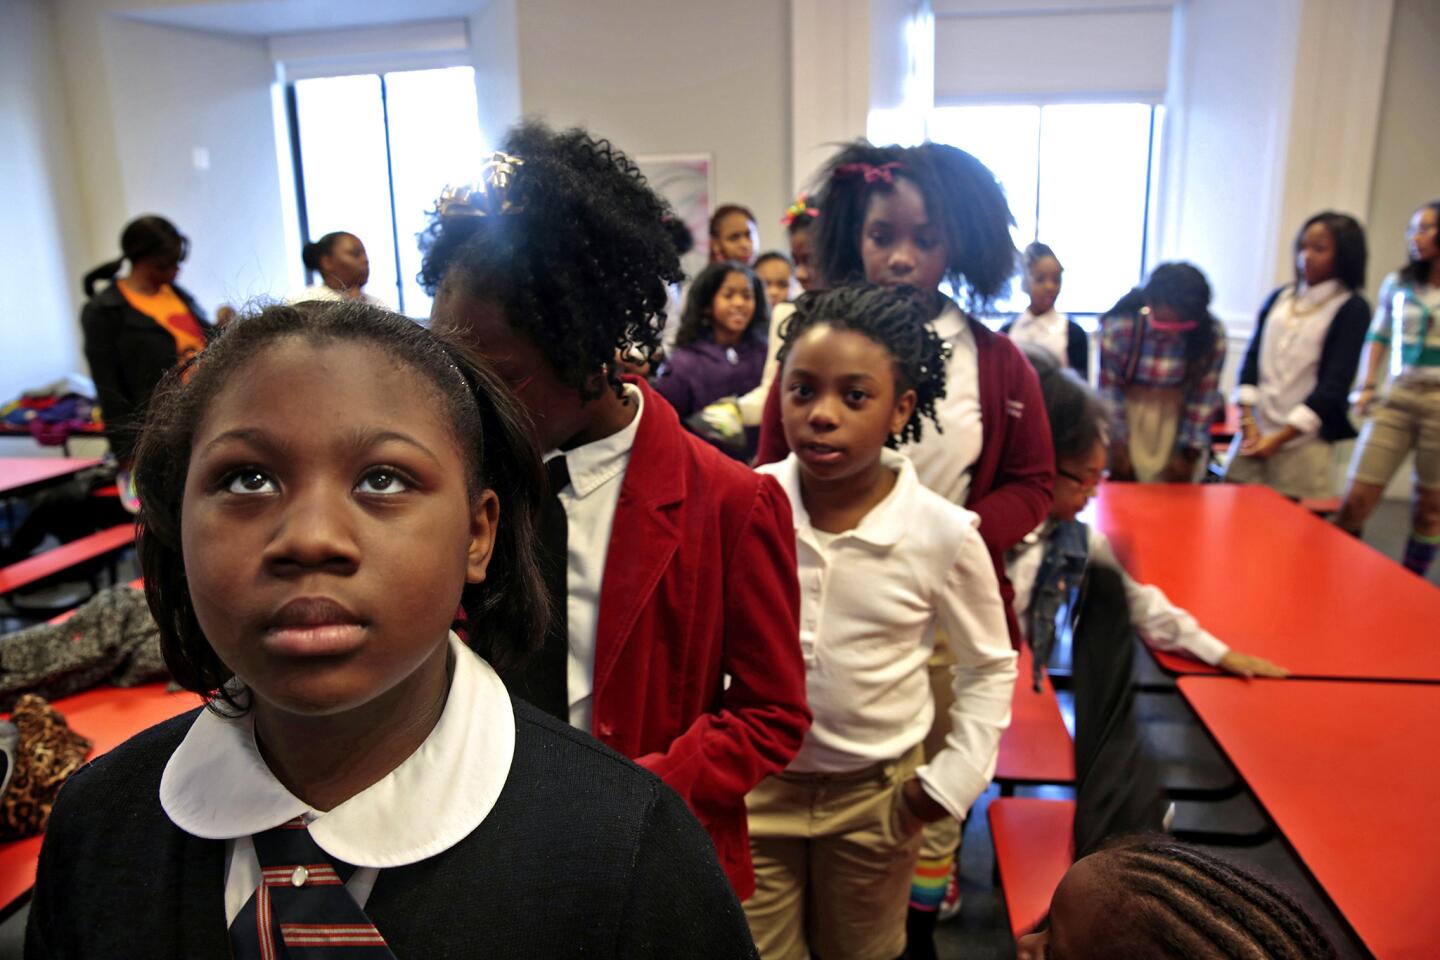 Kennedy Pelt, 9, left, waits with other members of the the Camden Sophisticated Sisters Drill Team to perform at the Philadelphia Museum of Art on Jan. 20, Martin Luther King Jr. Day.